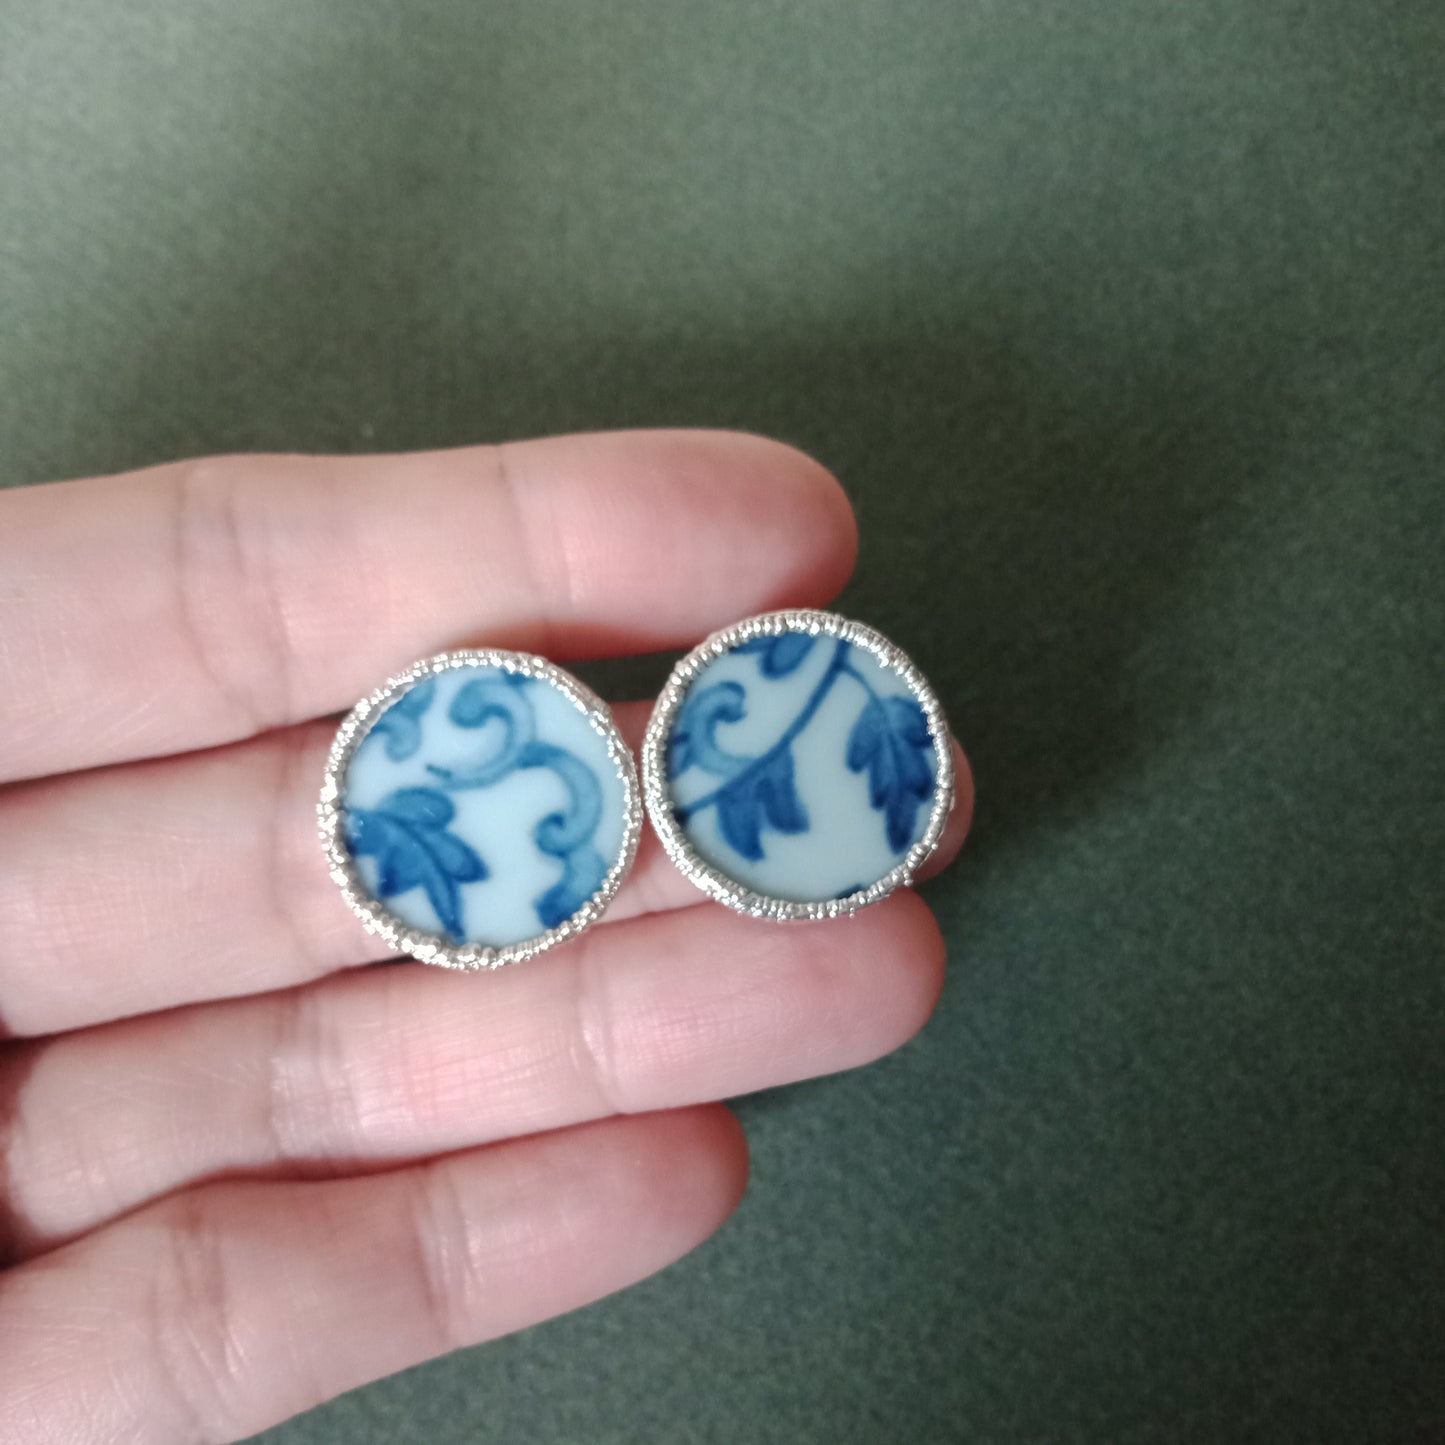 Blue and white porcelain silver tone stud earrings